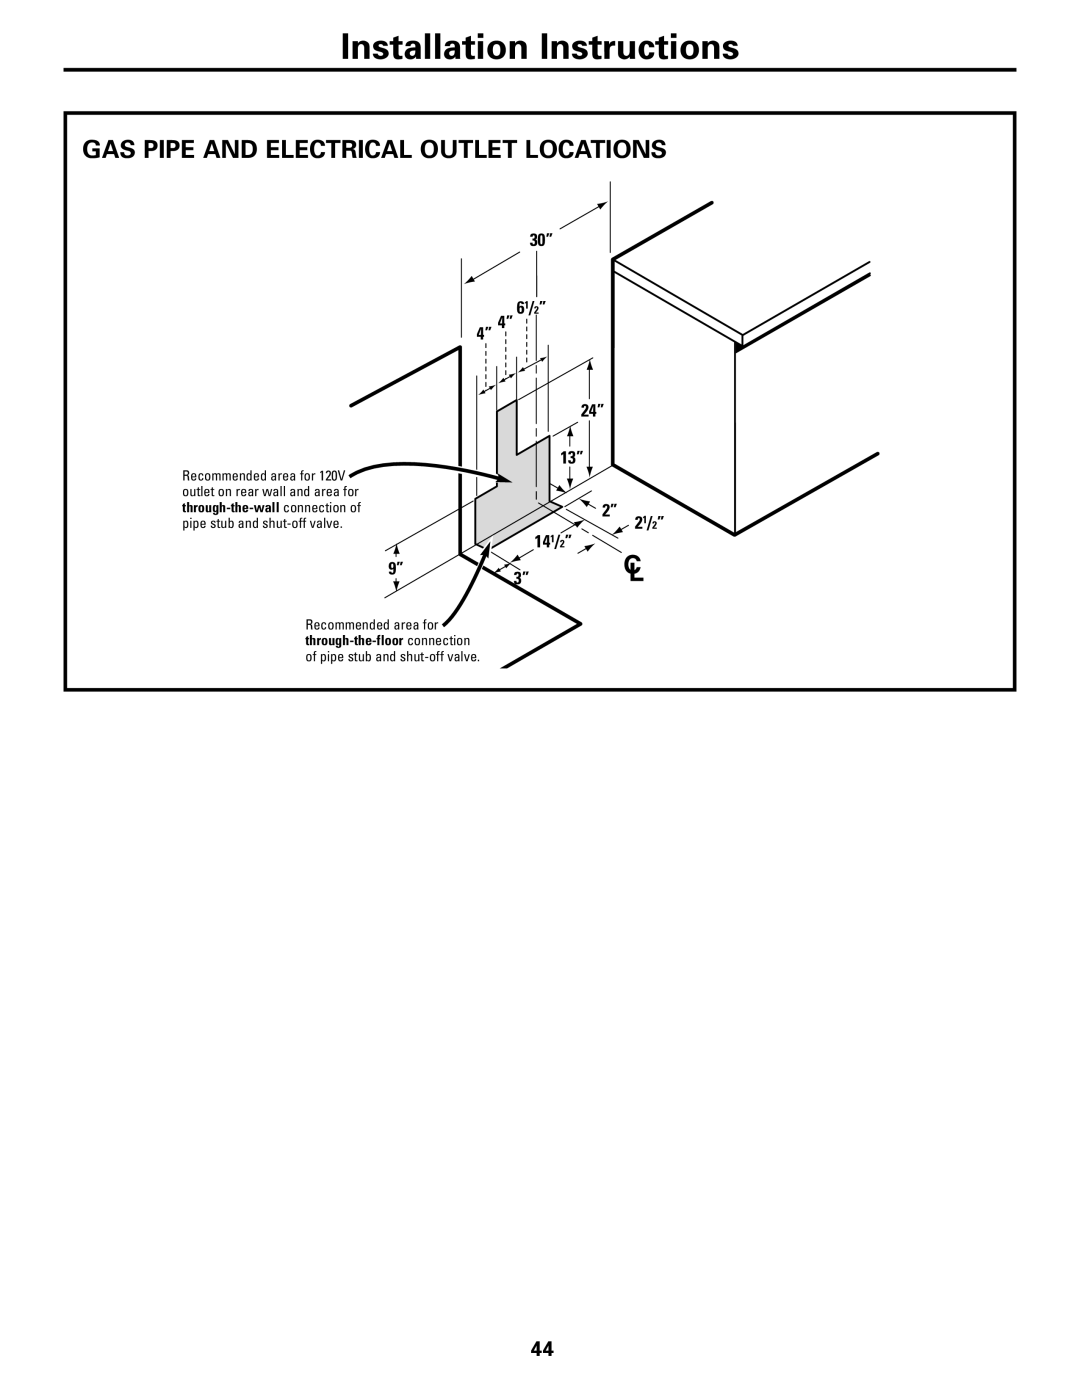 GE CGS980 Gas Pipe And Electrical Outlet Locations, Installation Instructions, 6 1/ 2”, 4” 4”, 14 1/ 2”, 2 1/ 2” 